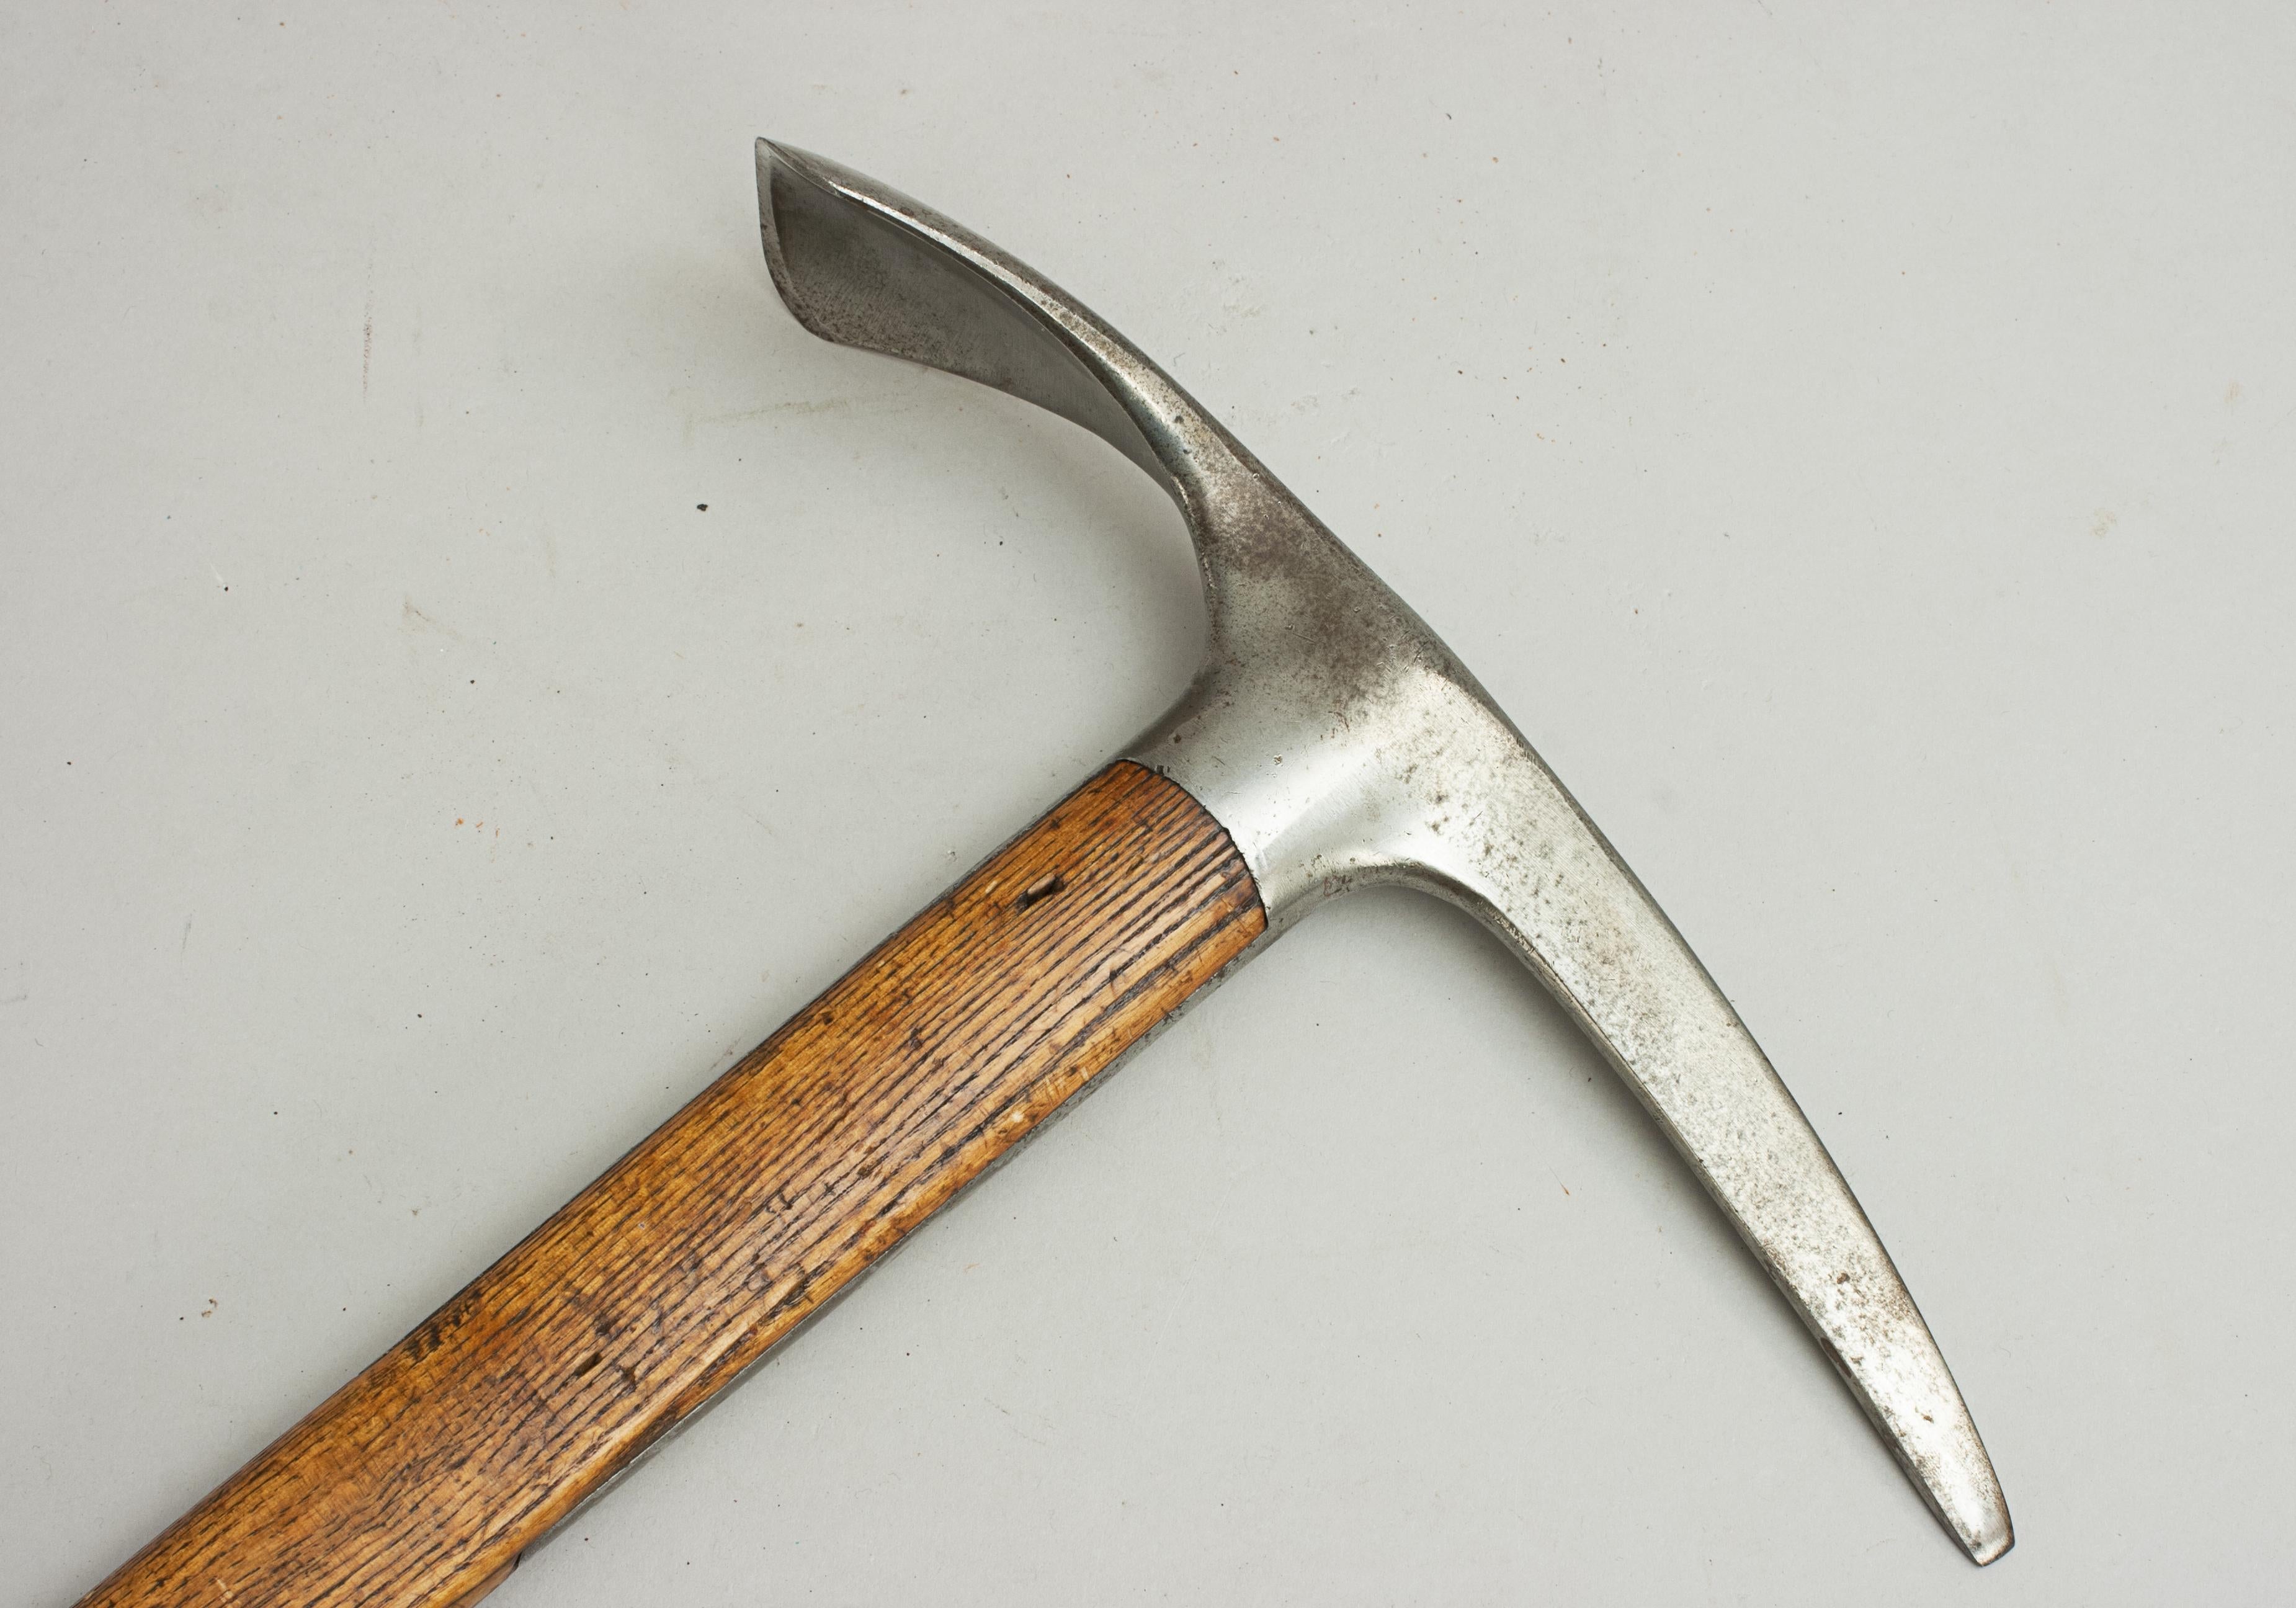 Vintage Ice Axe, Stubai.
A good Austrian 'Stubai' ice axe, the handle is made from ash with a good steel pick and with a good adze. This is a fine quality ice pick with the head stamped with the diamond 'STUBAI' logo.

Ice axes are multipurpose